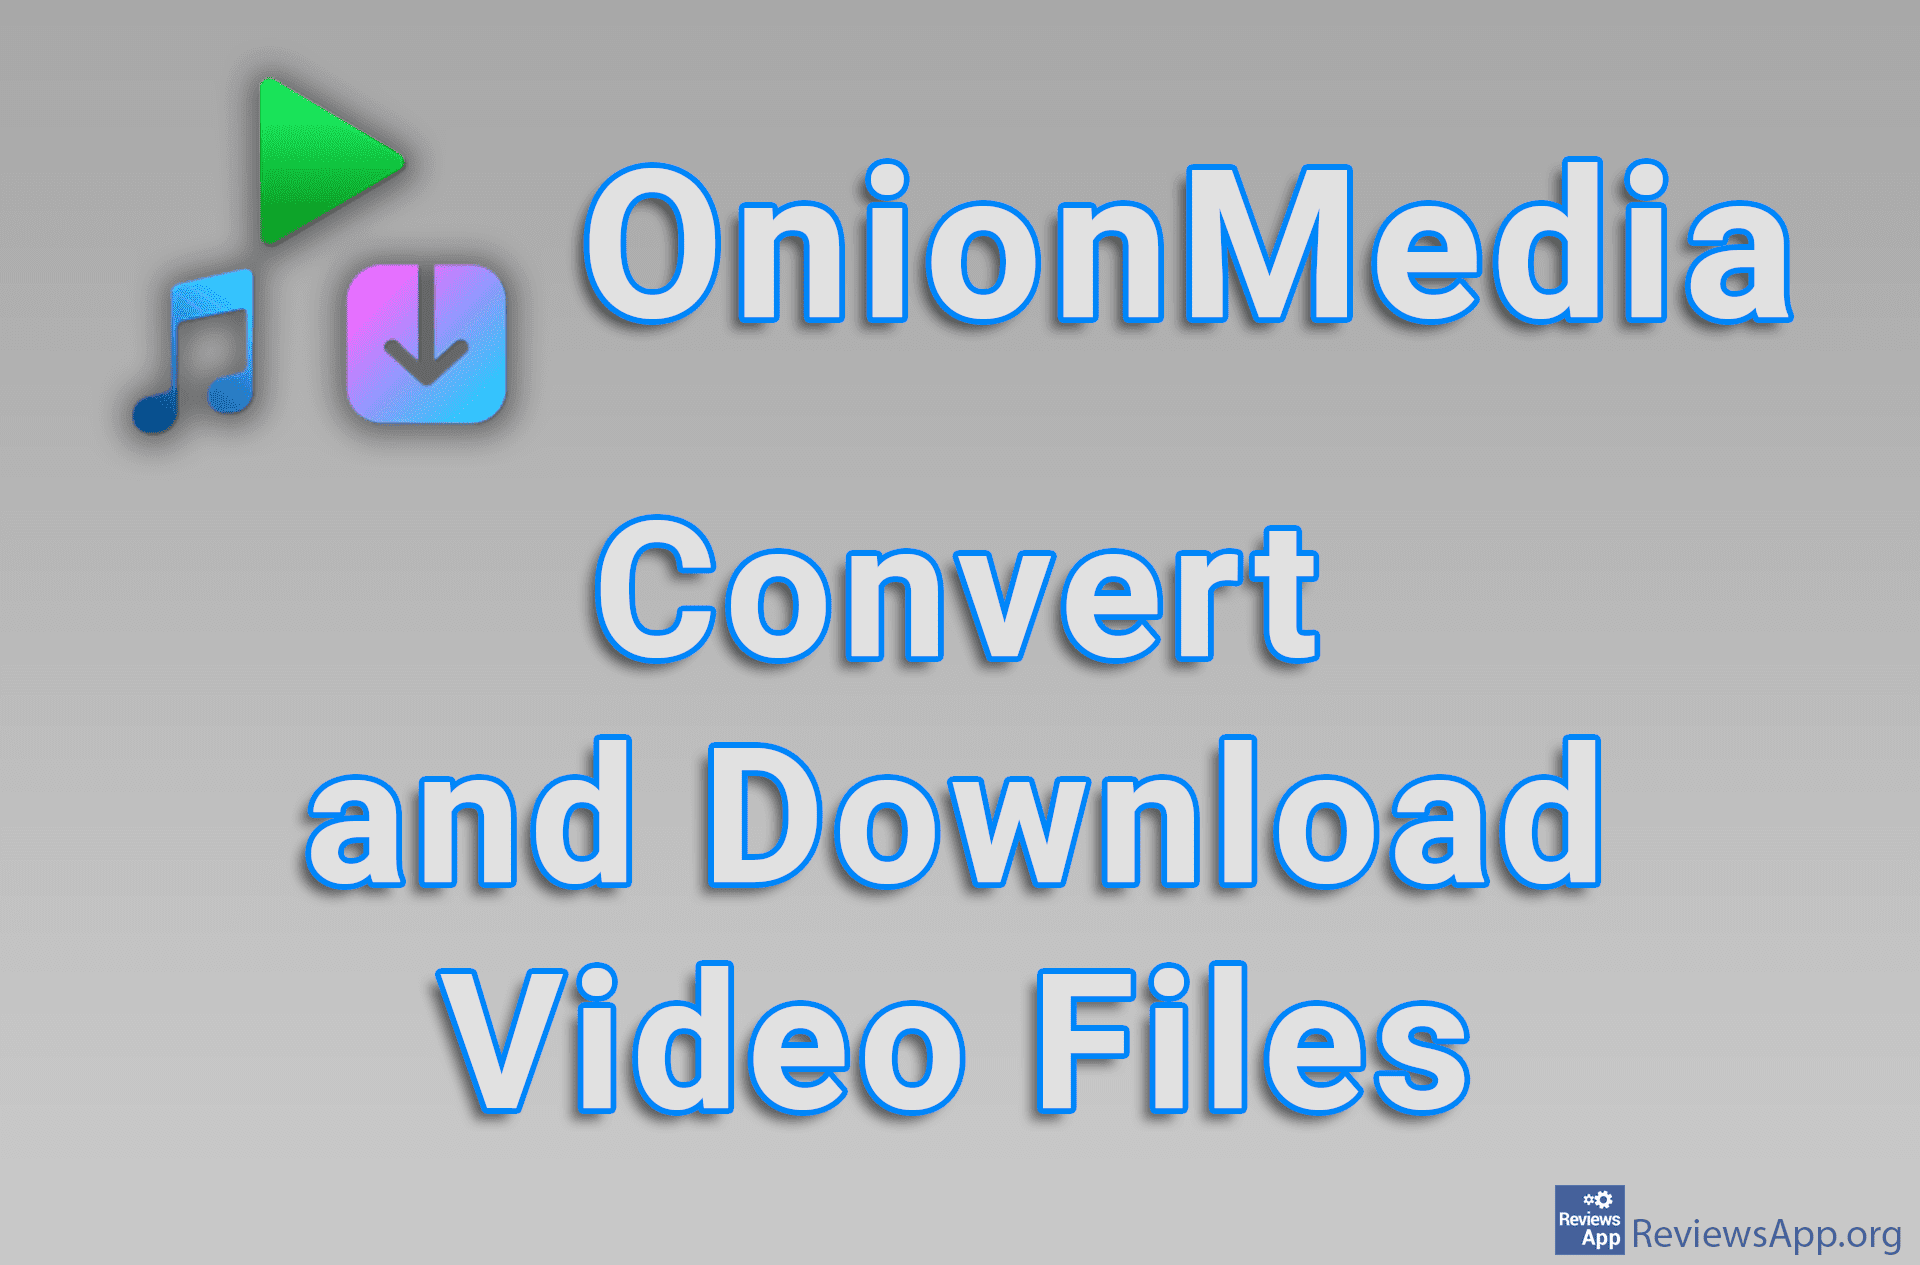 OnionMedia – Convert and Download Video Files